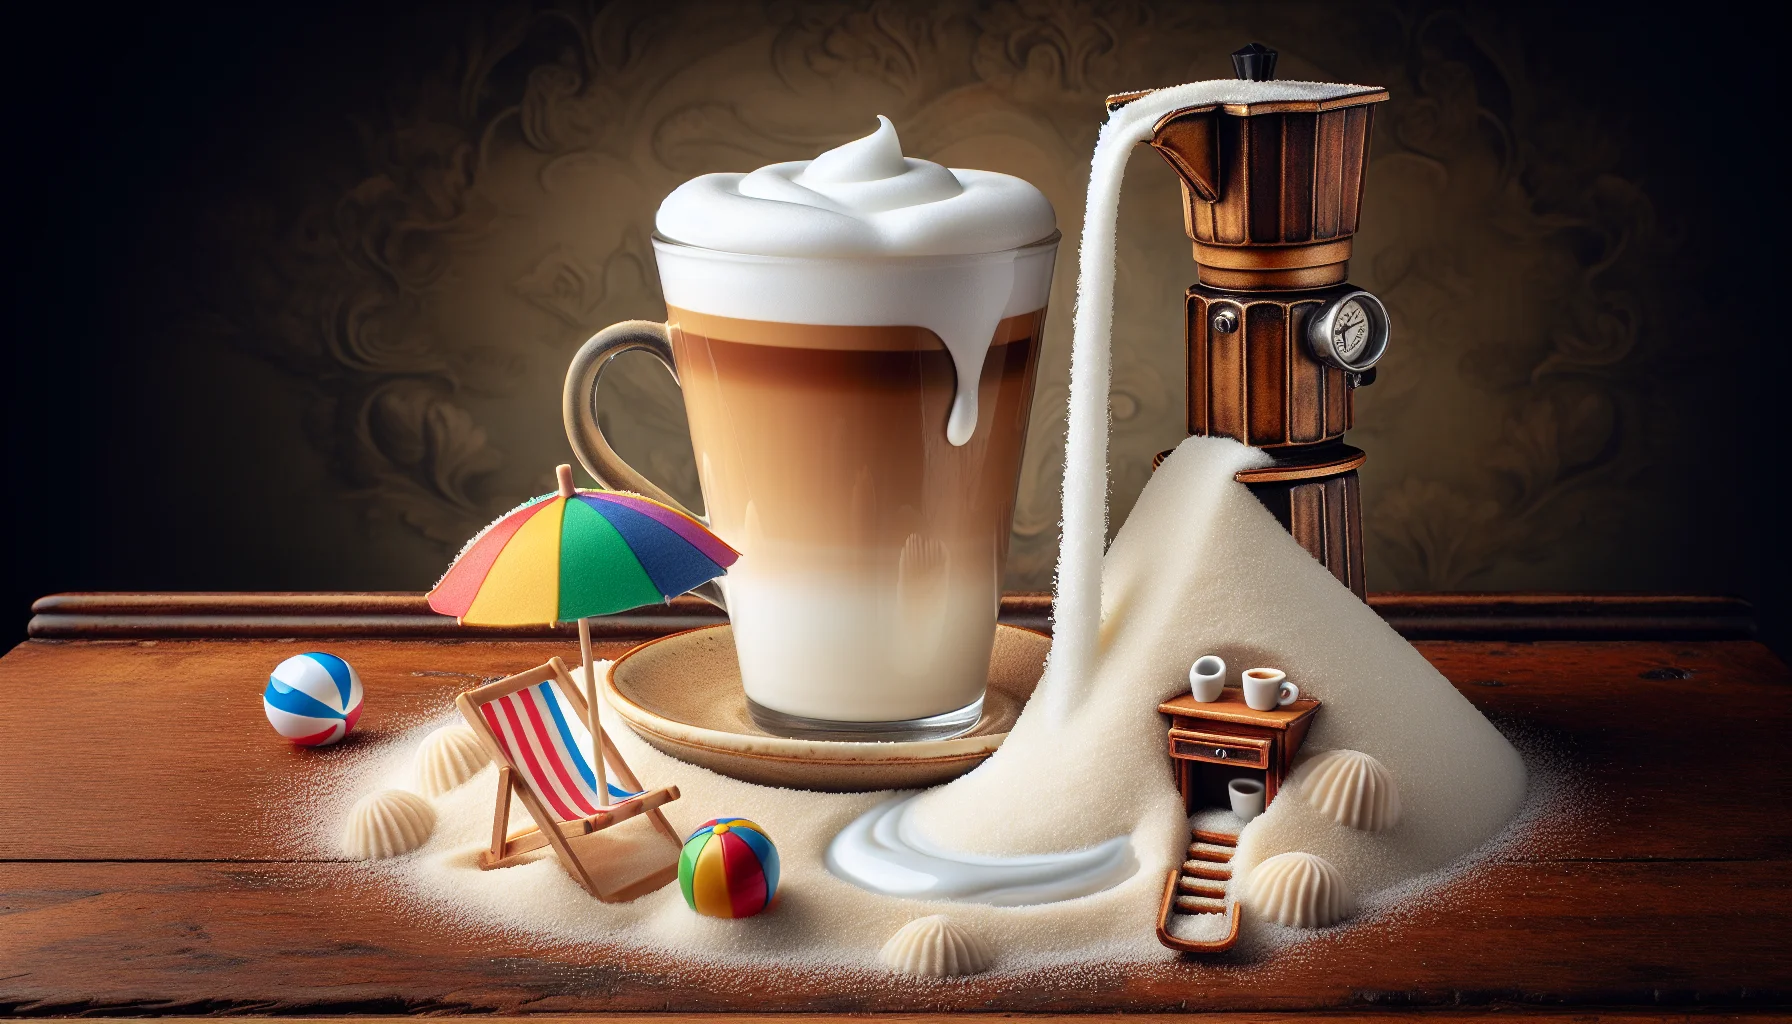 An intriguing image that features a cup of creamy, frothy, Bianco Latte, set in a humorous scenario to entice people. The latte itself is the star of the scene, personified with a rainbow parasol as if enjoying a sunny beach day. Next to the latte, a tiny beach chair is buried in white sugar grains resembling sand. A miniature striped beach ball is playfully nestled near the 'sandy' sugar. The backdrop offers an imaginative espresso waterfall, pouring into a vast sea of cream. All this comical feast is set on an opulent vintage-style wooden table.